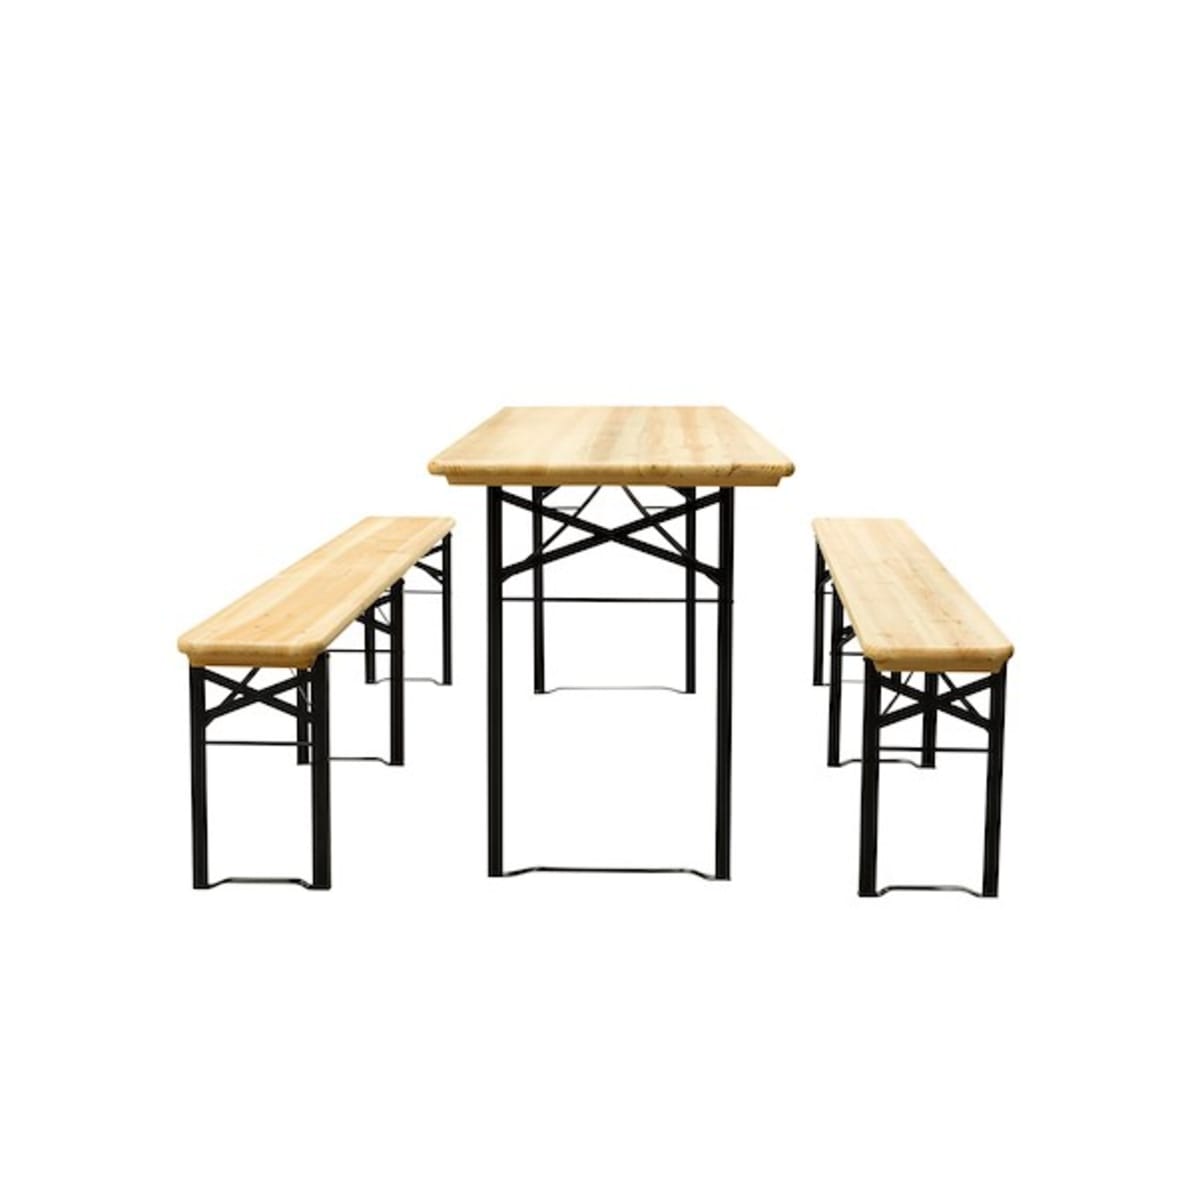 FIRA SET 8 Seats table 187X60cm and 2 benches in pine and steel